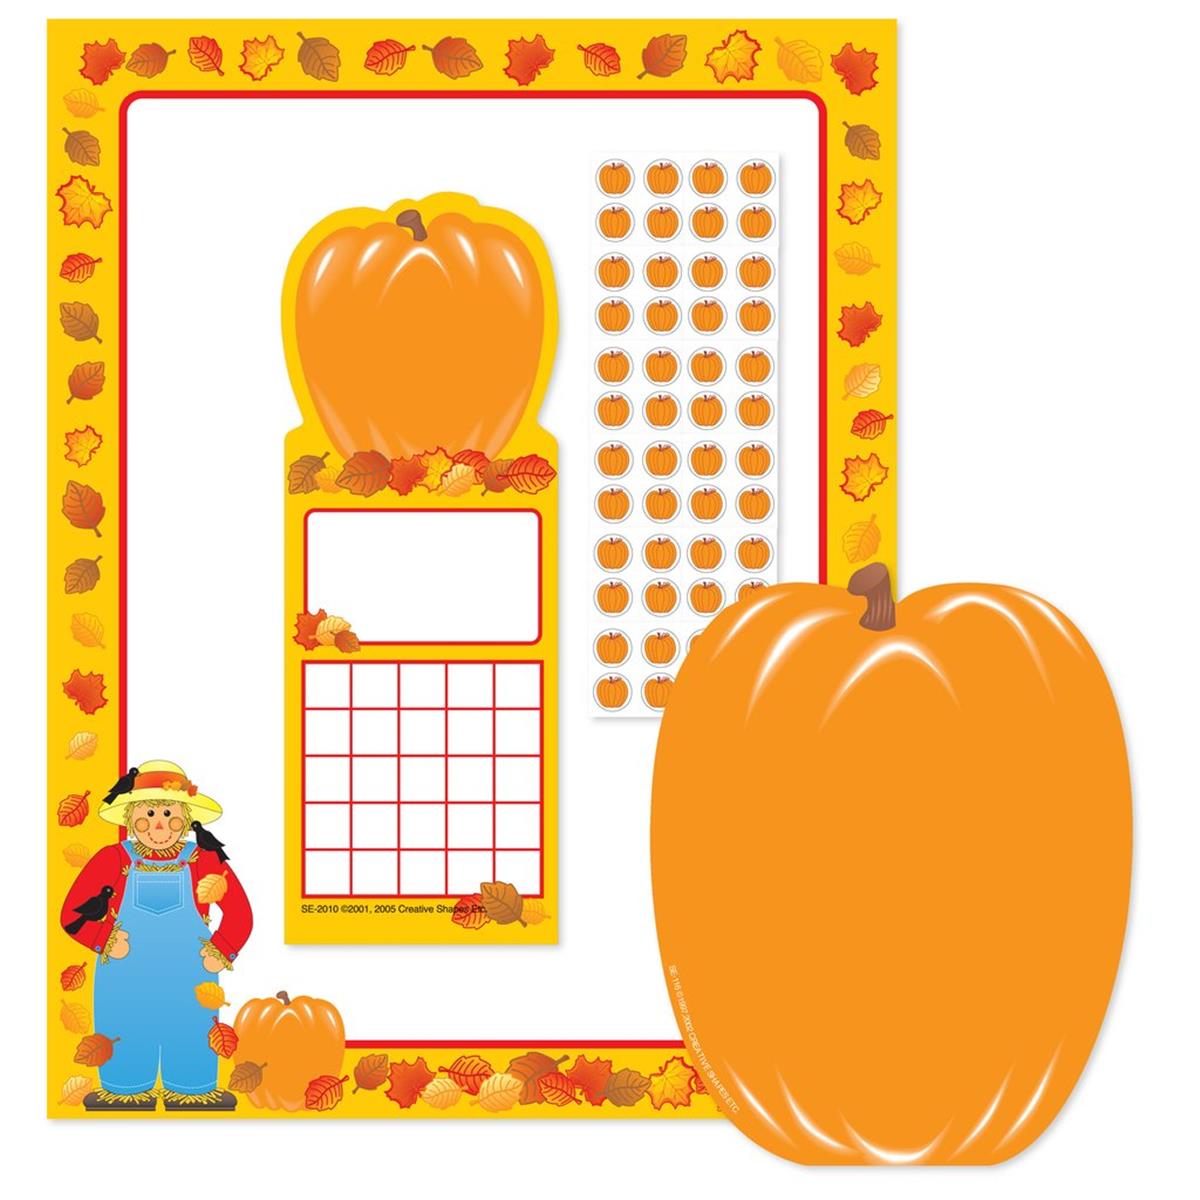 Picture of Creative Shapes Etc SE-7104 11 x 8.5 in. Stationery Set - Fall